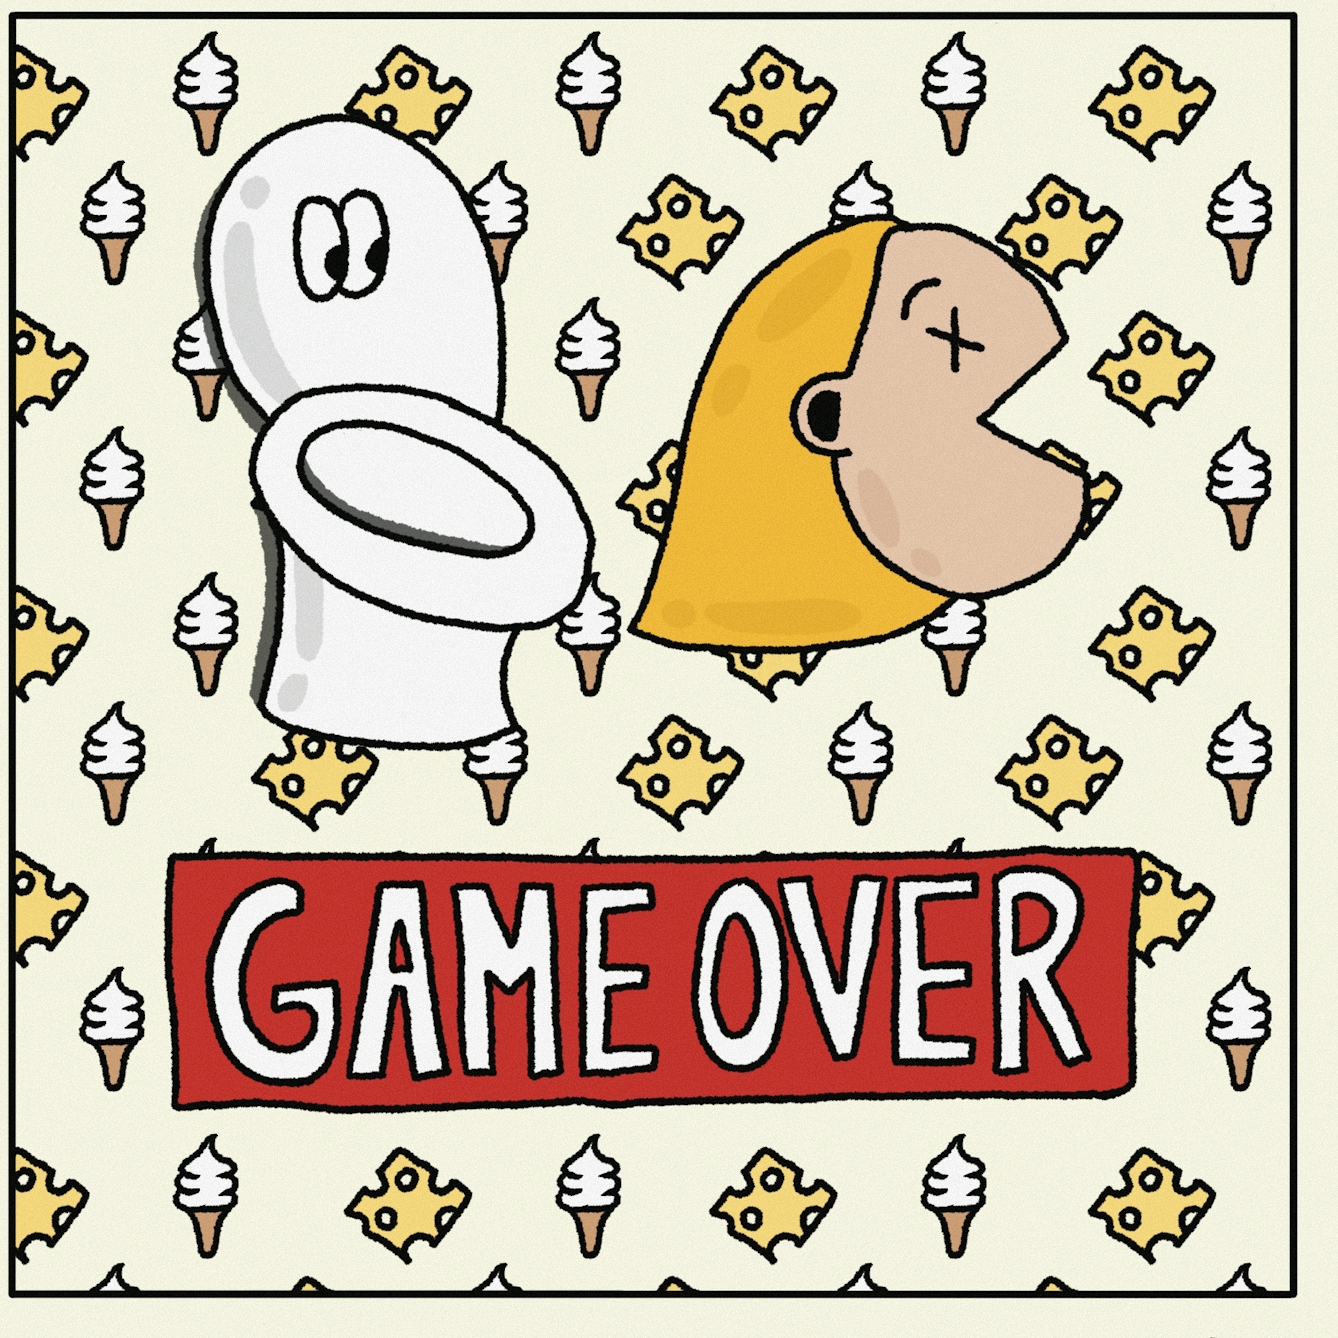 Panel 4 of a digitally drawn, four-panel comic titled ‘Down the Toilet’: A big, red box says “GAME OVER”. The character is next to the toilet. 